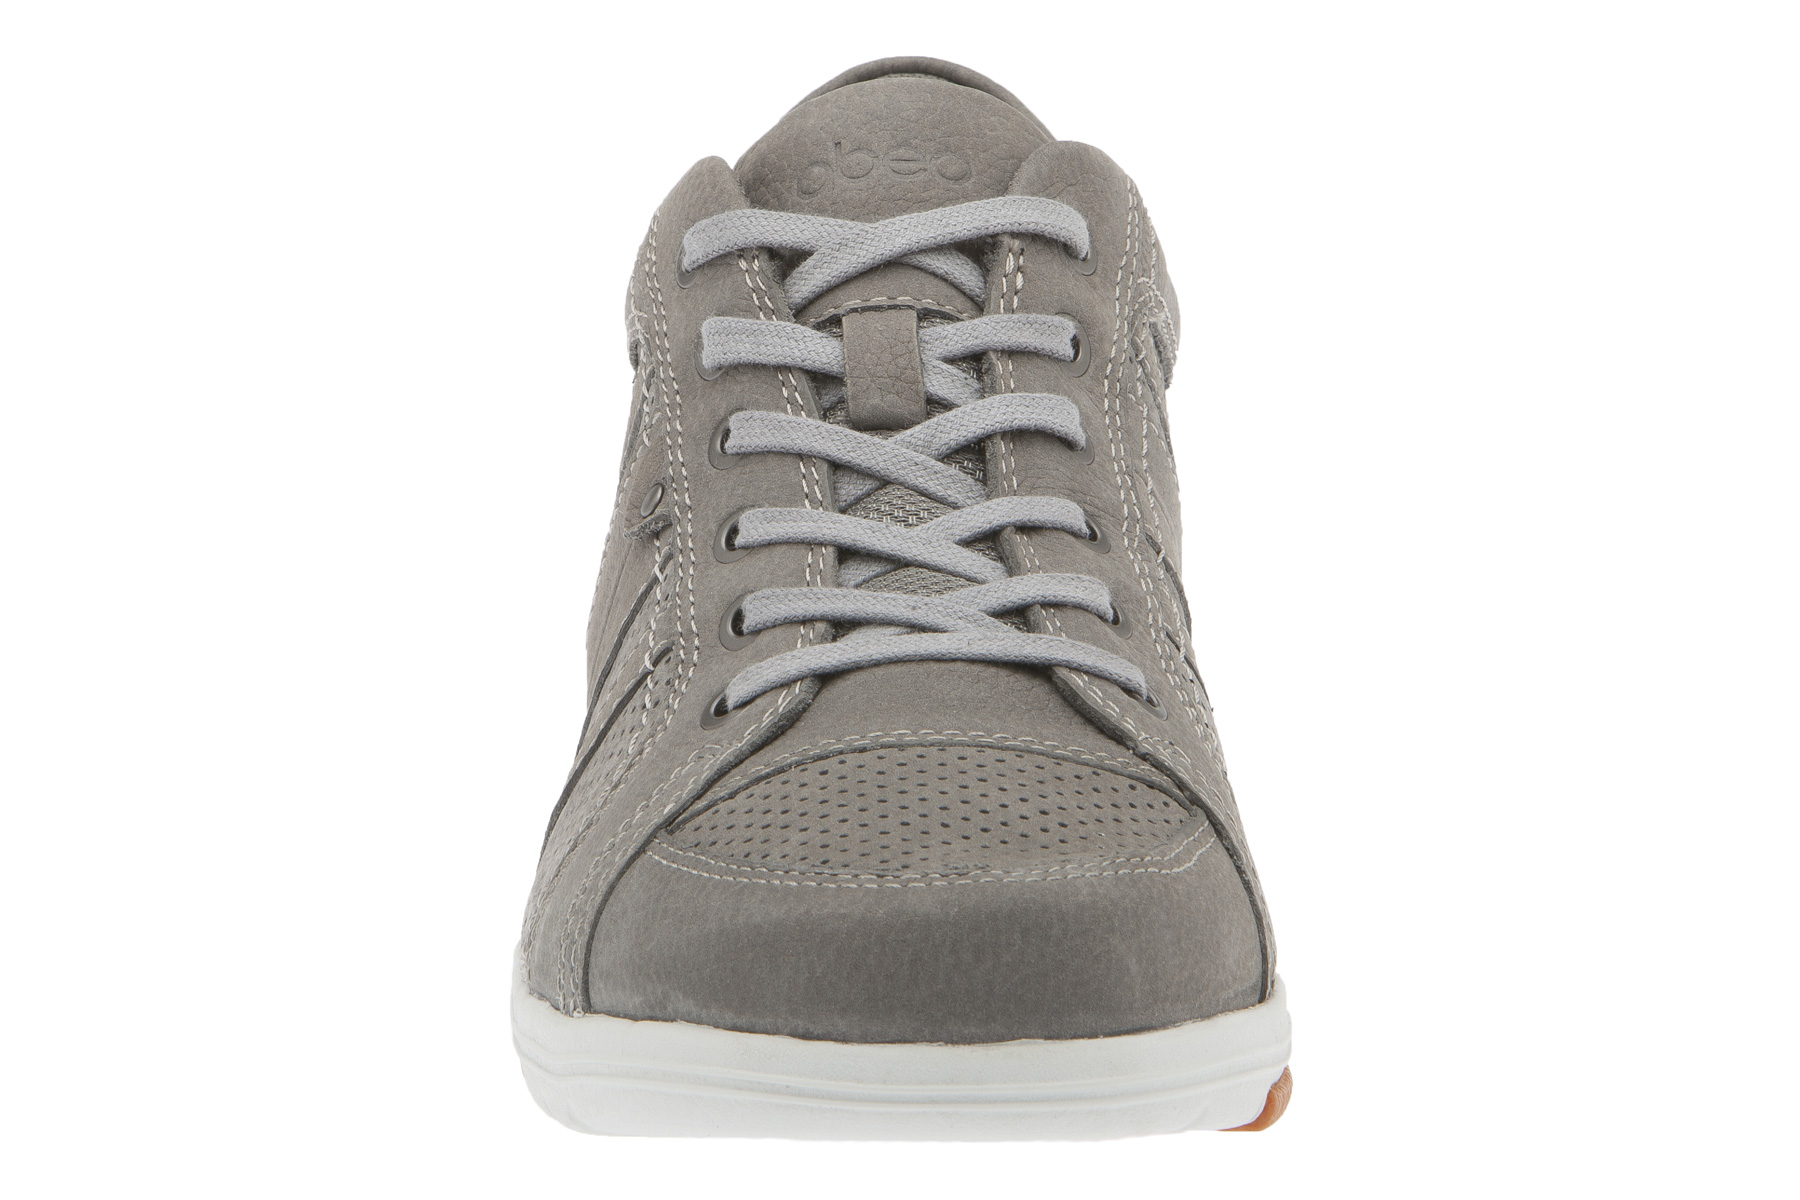 ABEO  Cort - Casual Shoes in Grey - image 5 of 6